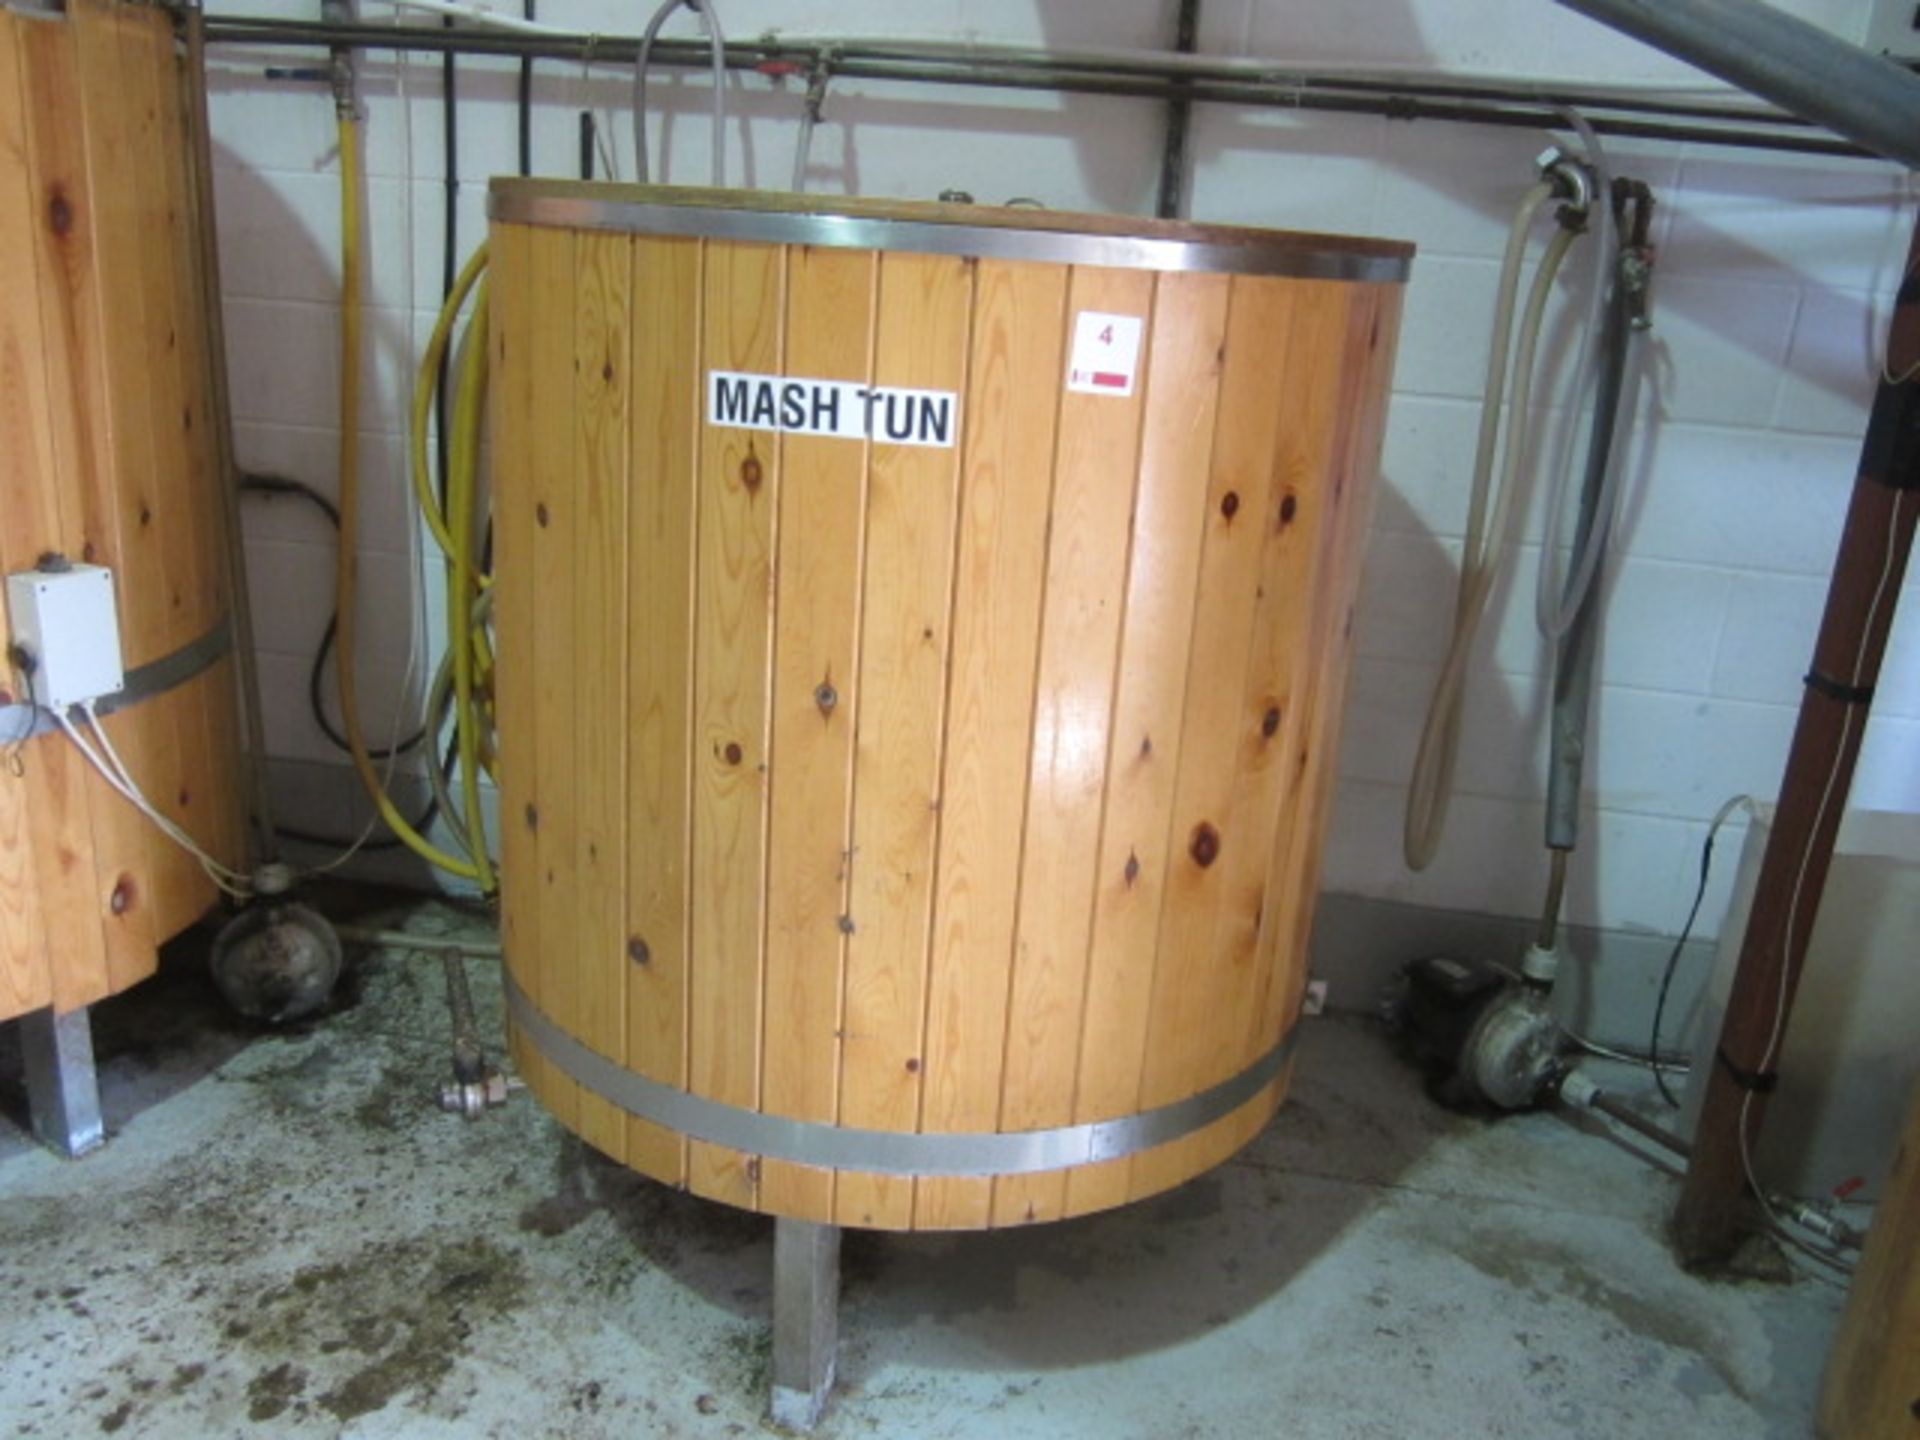 PBC Brewery Solutions stainless steel timber clad mash tun for 6 barrel brewing system on stand,